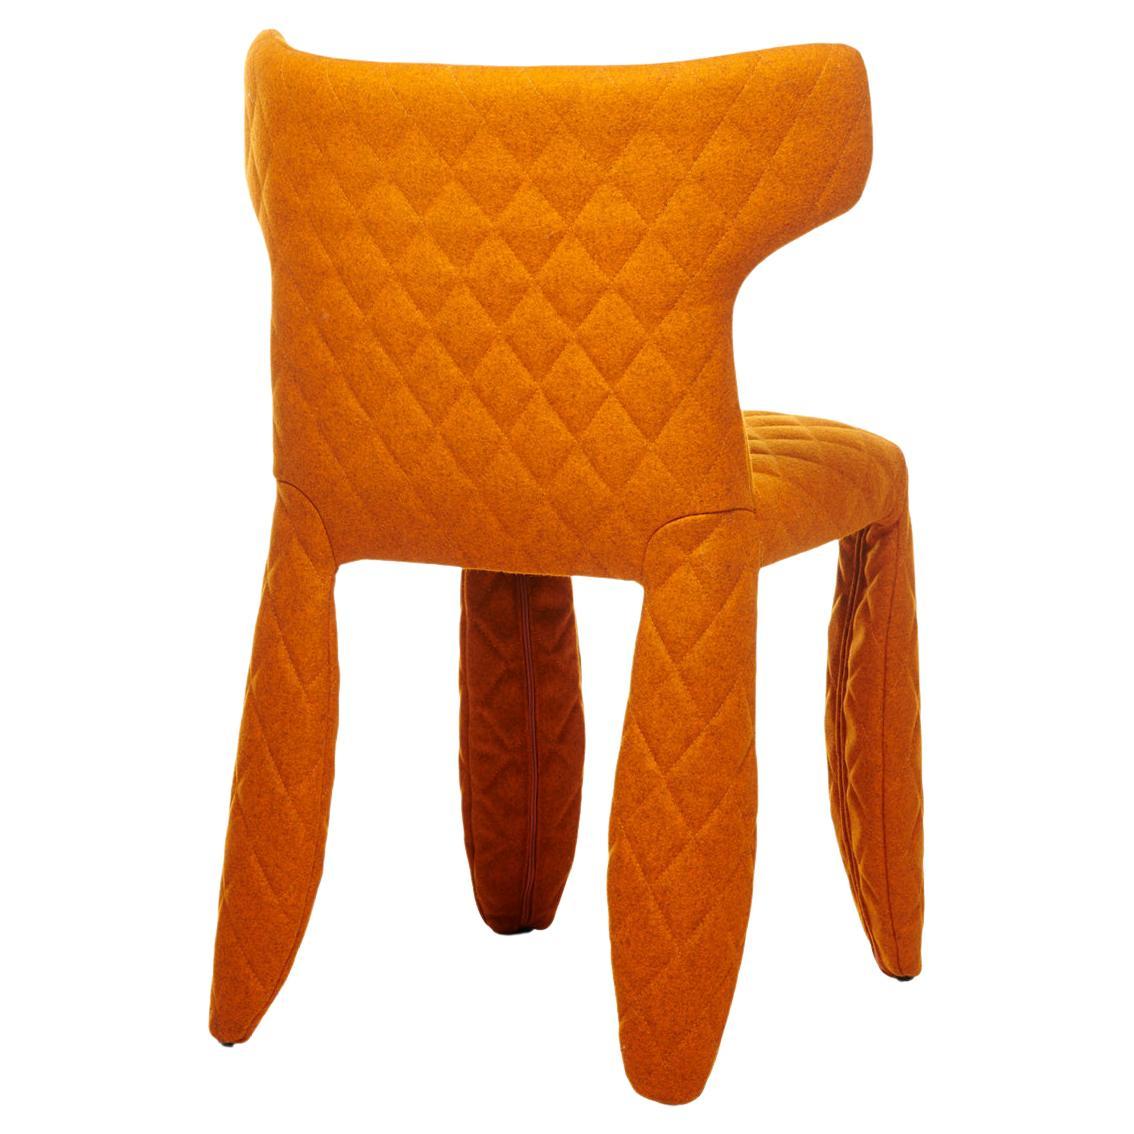 Moooi Monster Diamond Chair with Arms in Divina 3, 542 Orange Upholstery For Sale